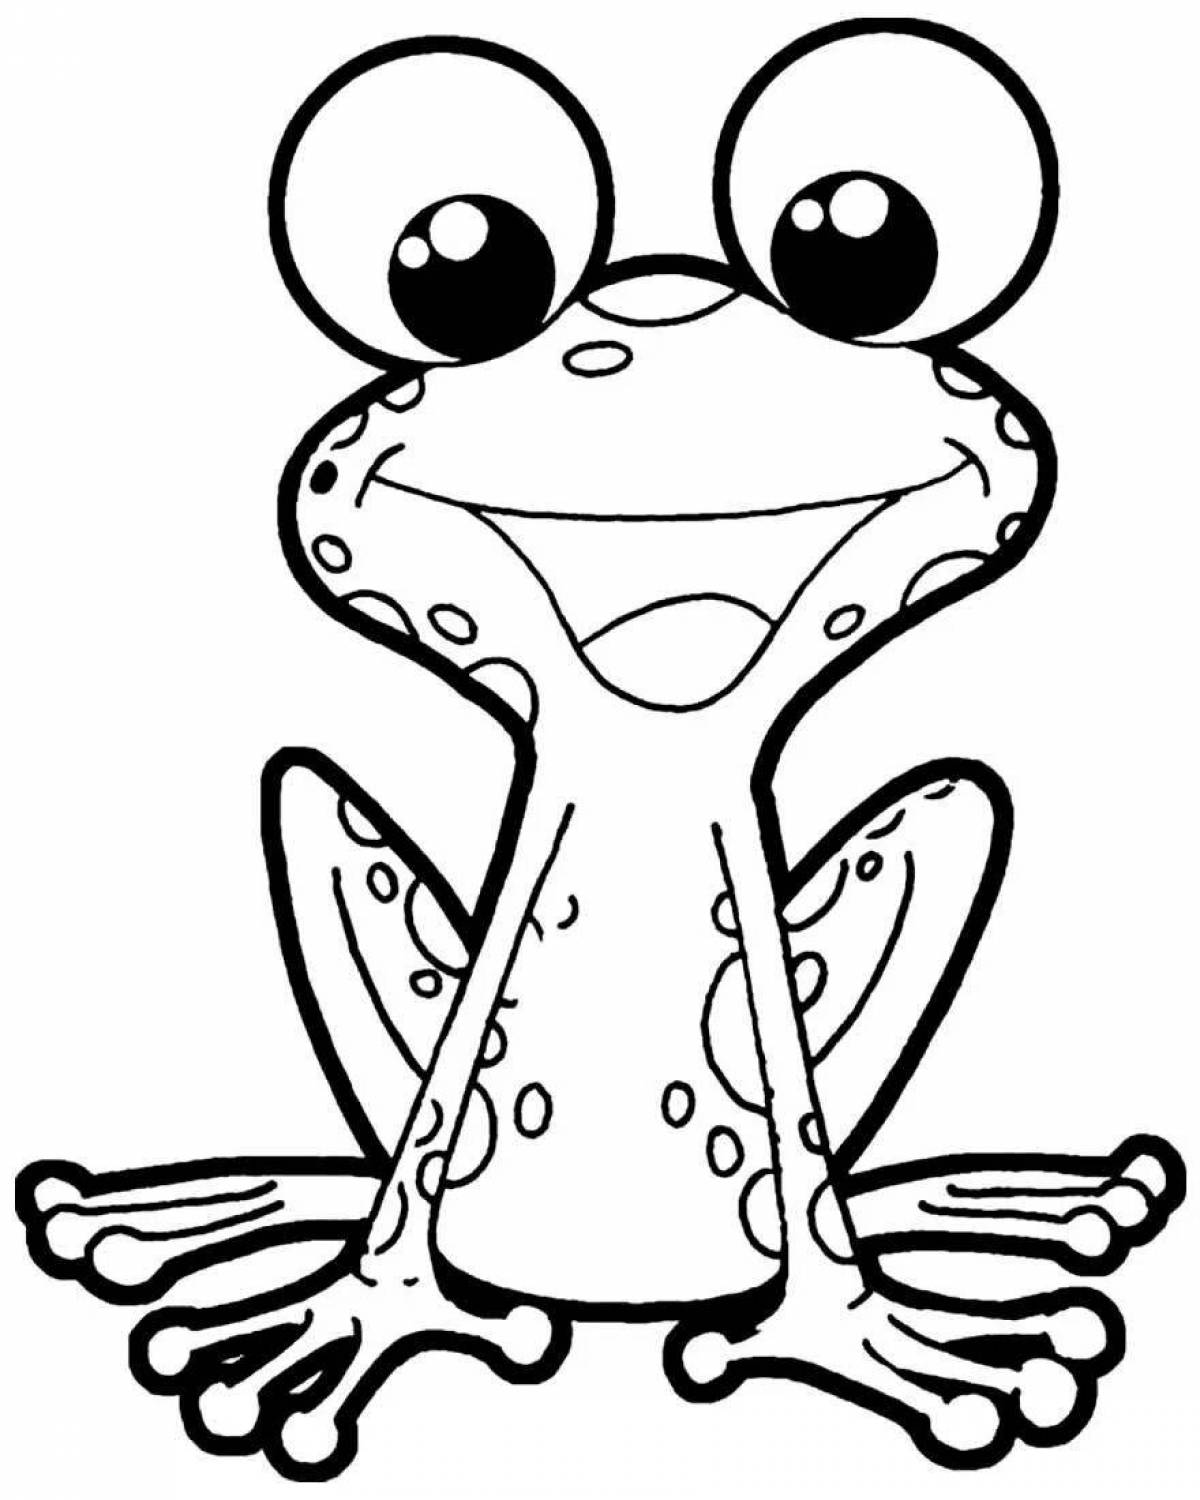 Naughty cute frog coloring book